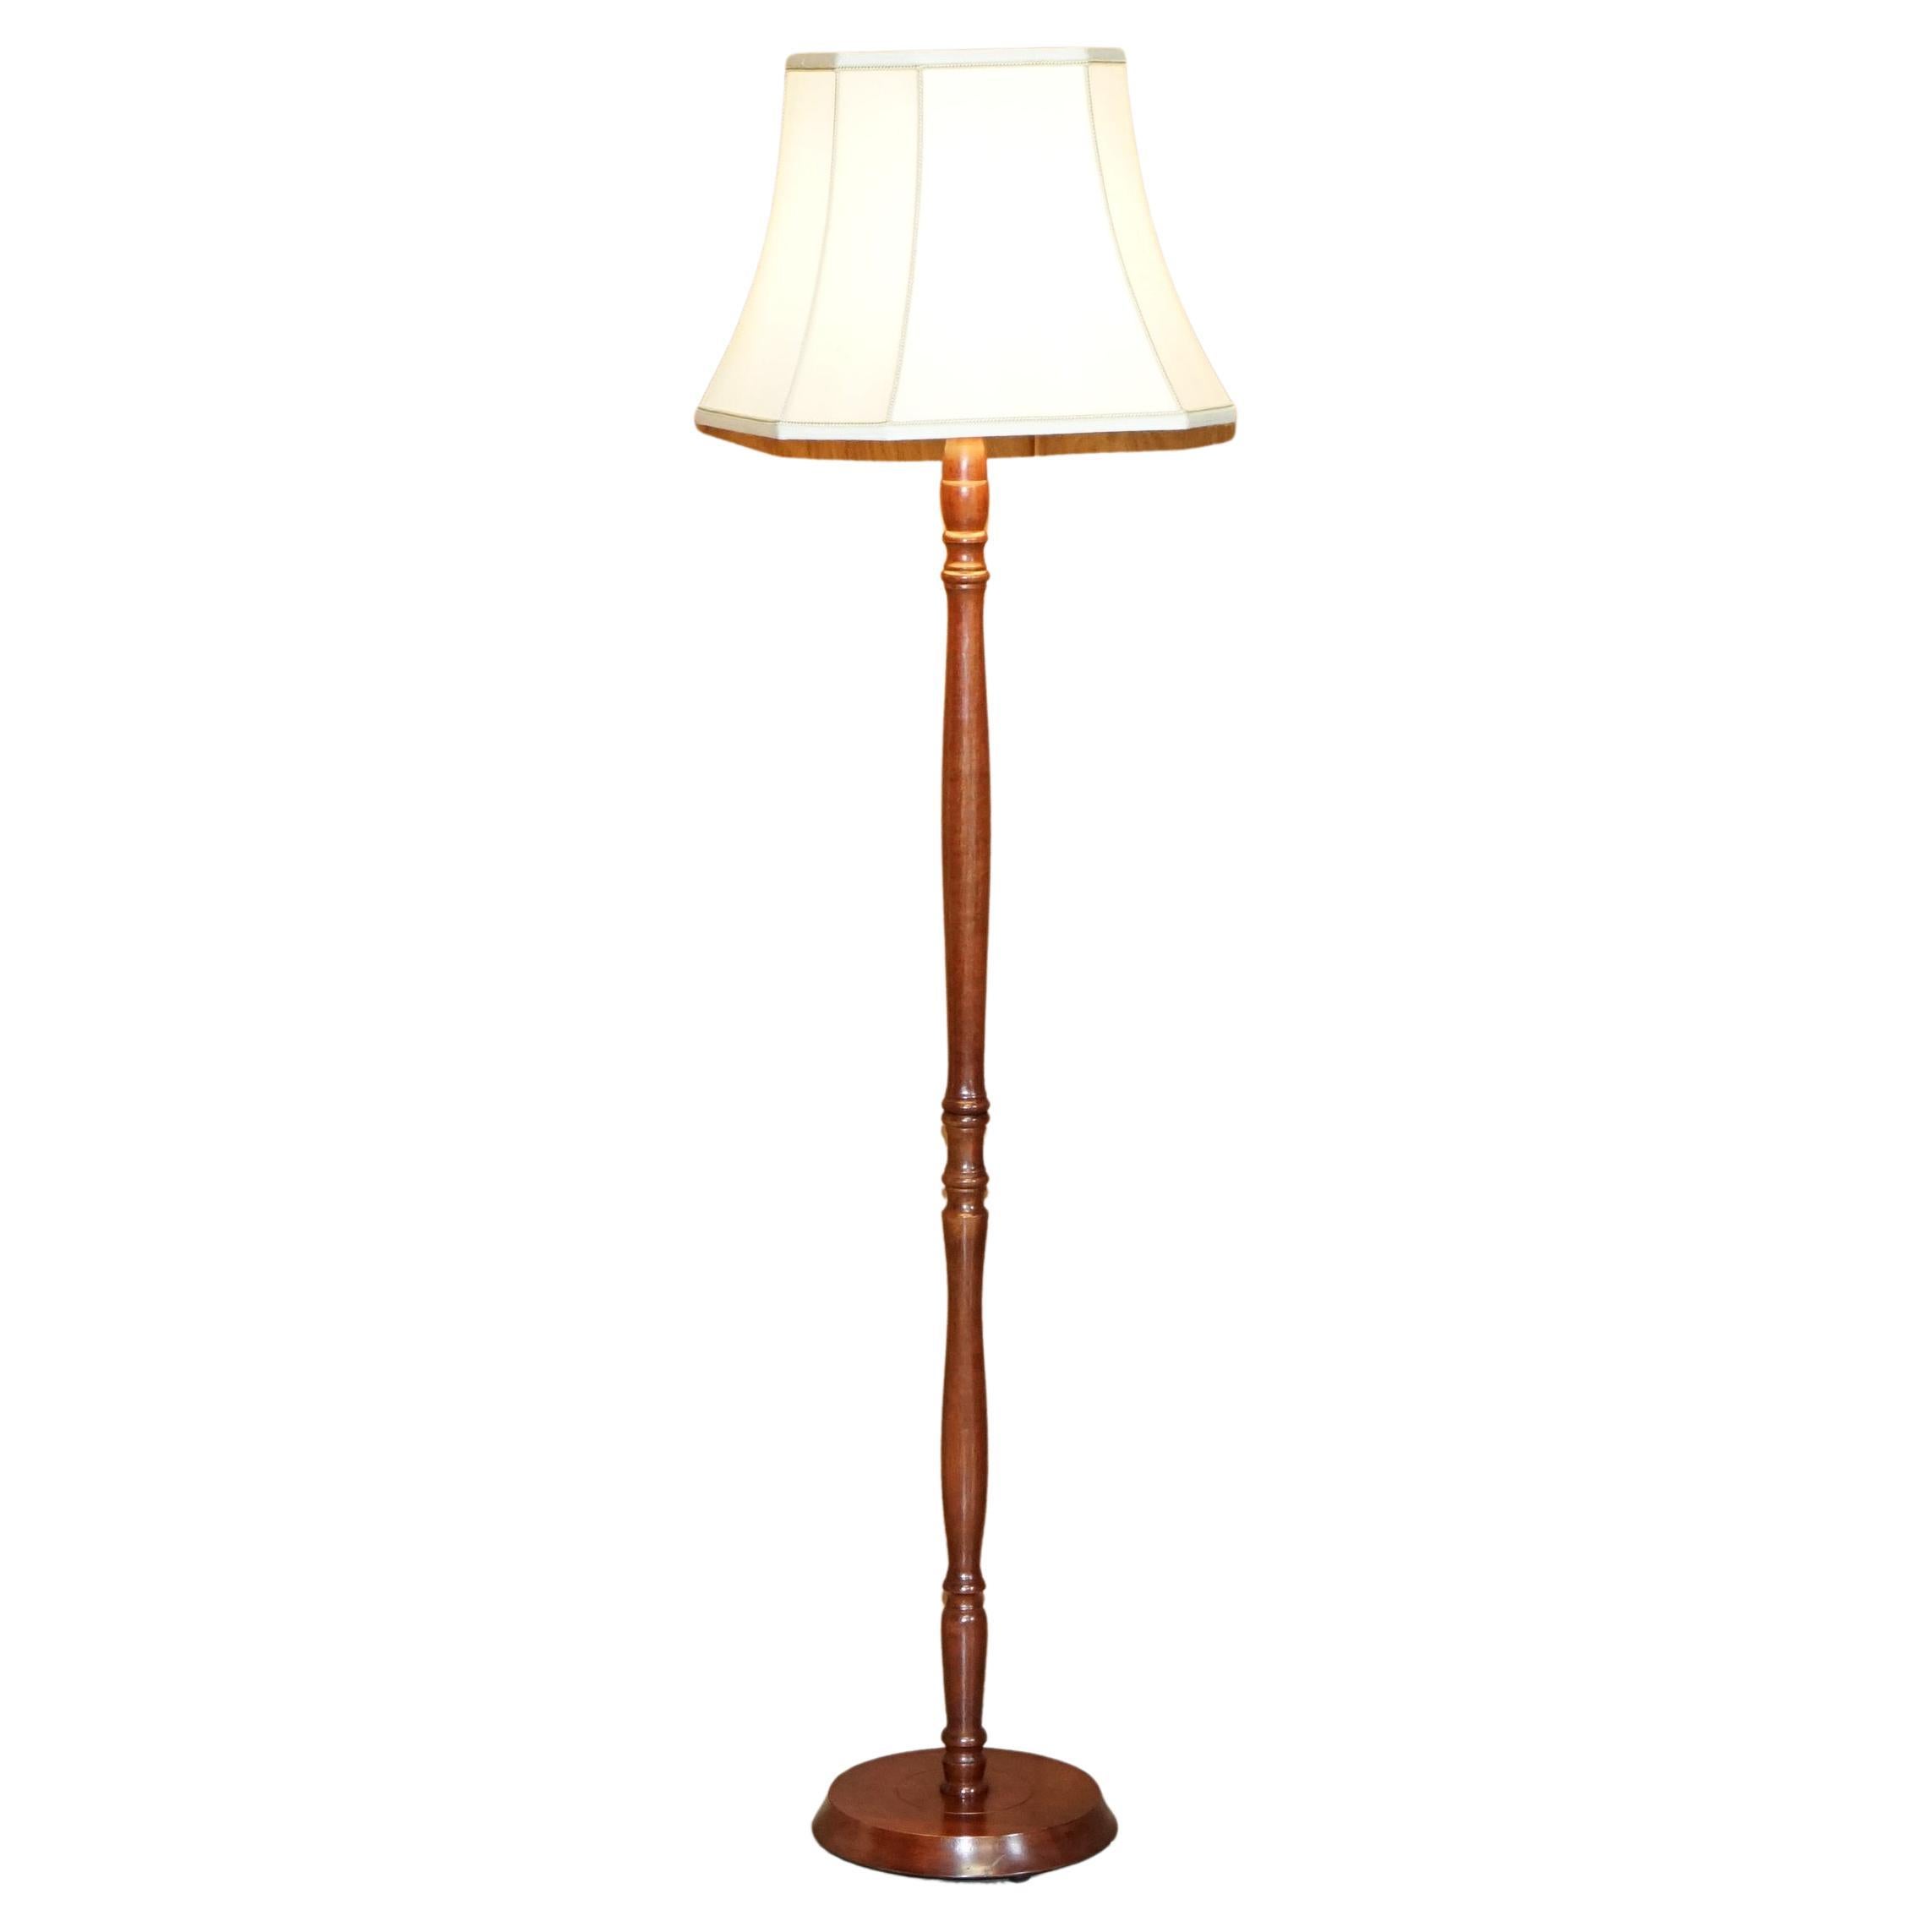 Lovely Vintage circa 1940's Floor Standing Lamp with Endon Hand Made Lampshade